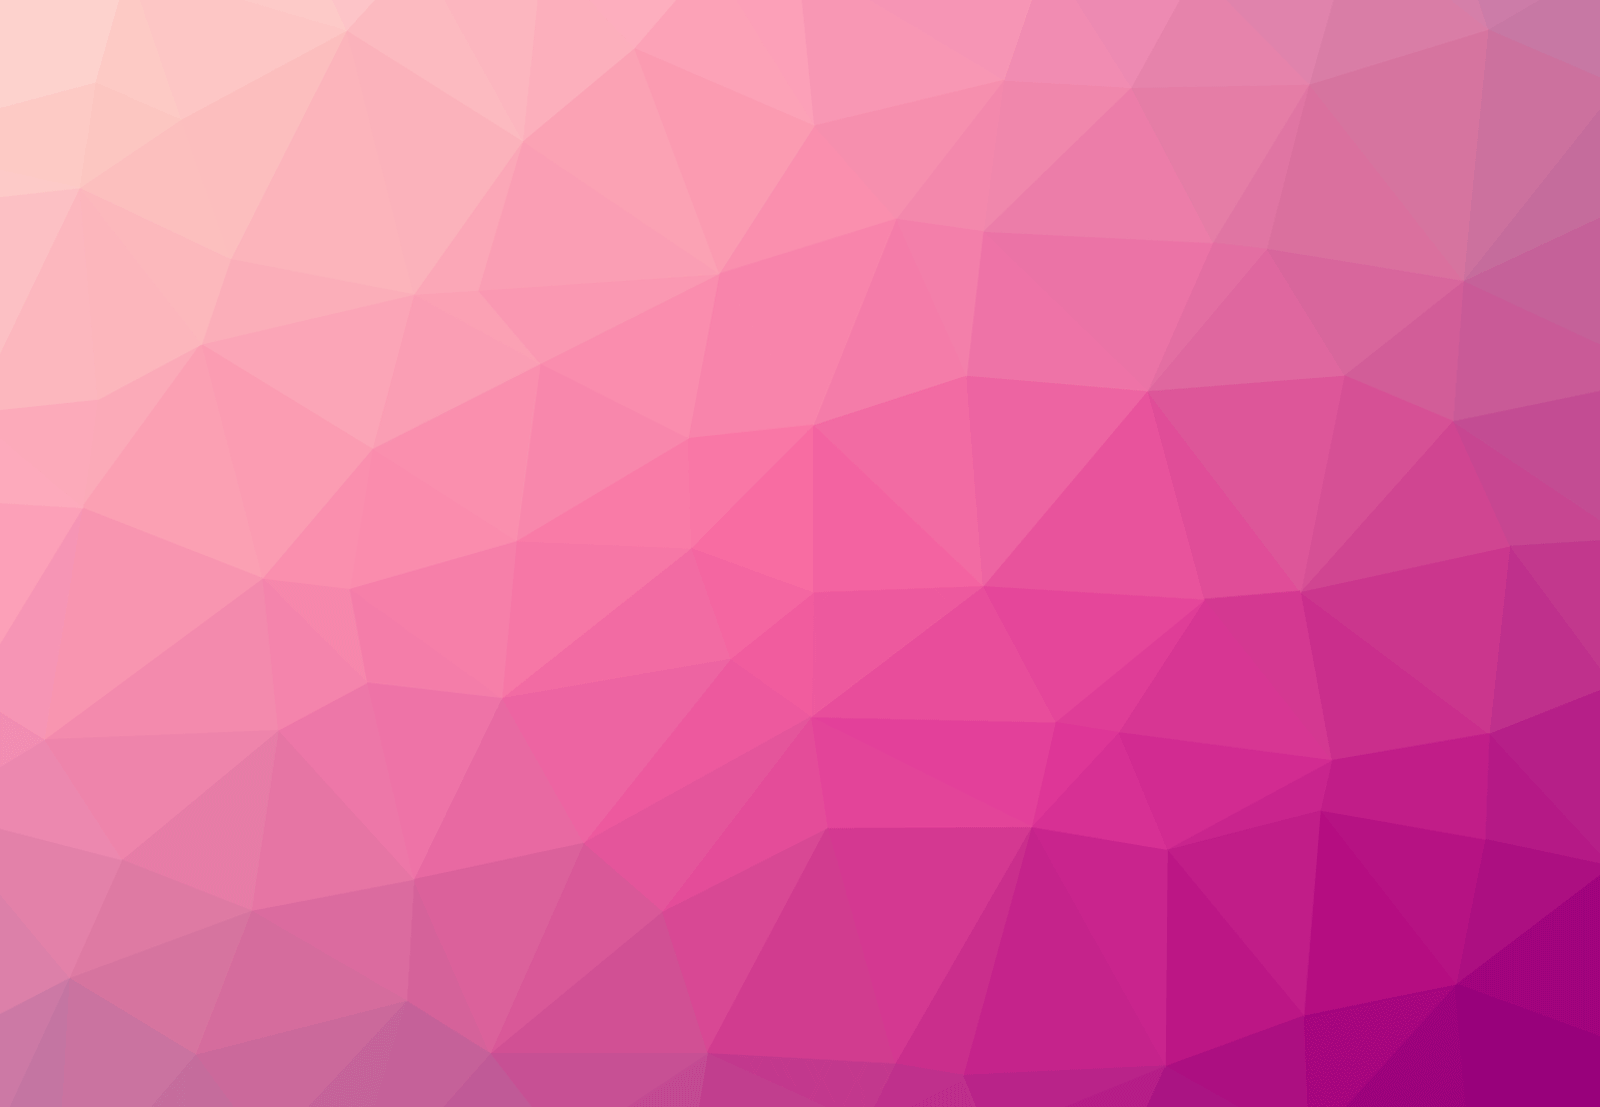 Polygon Background Generator Resources Trianglify